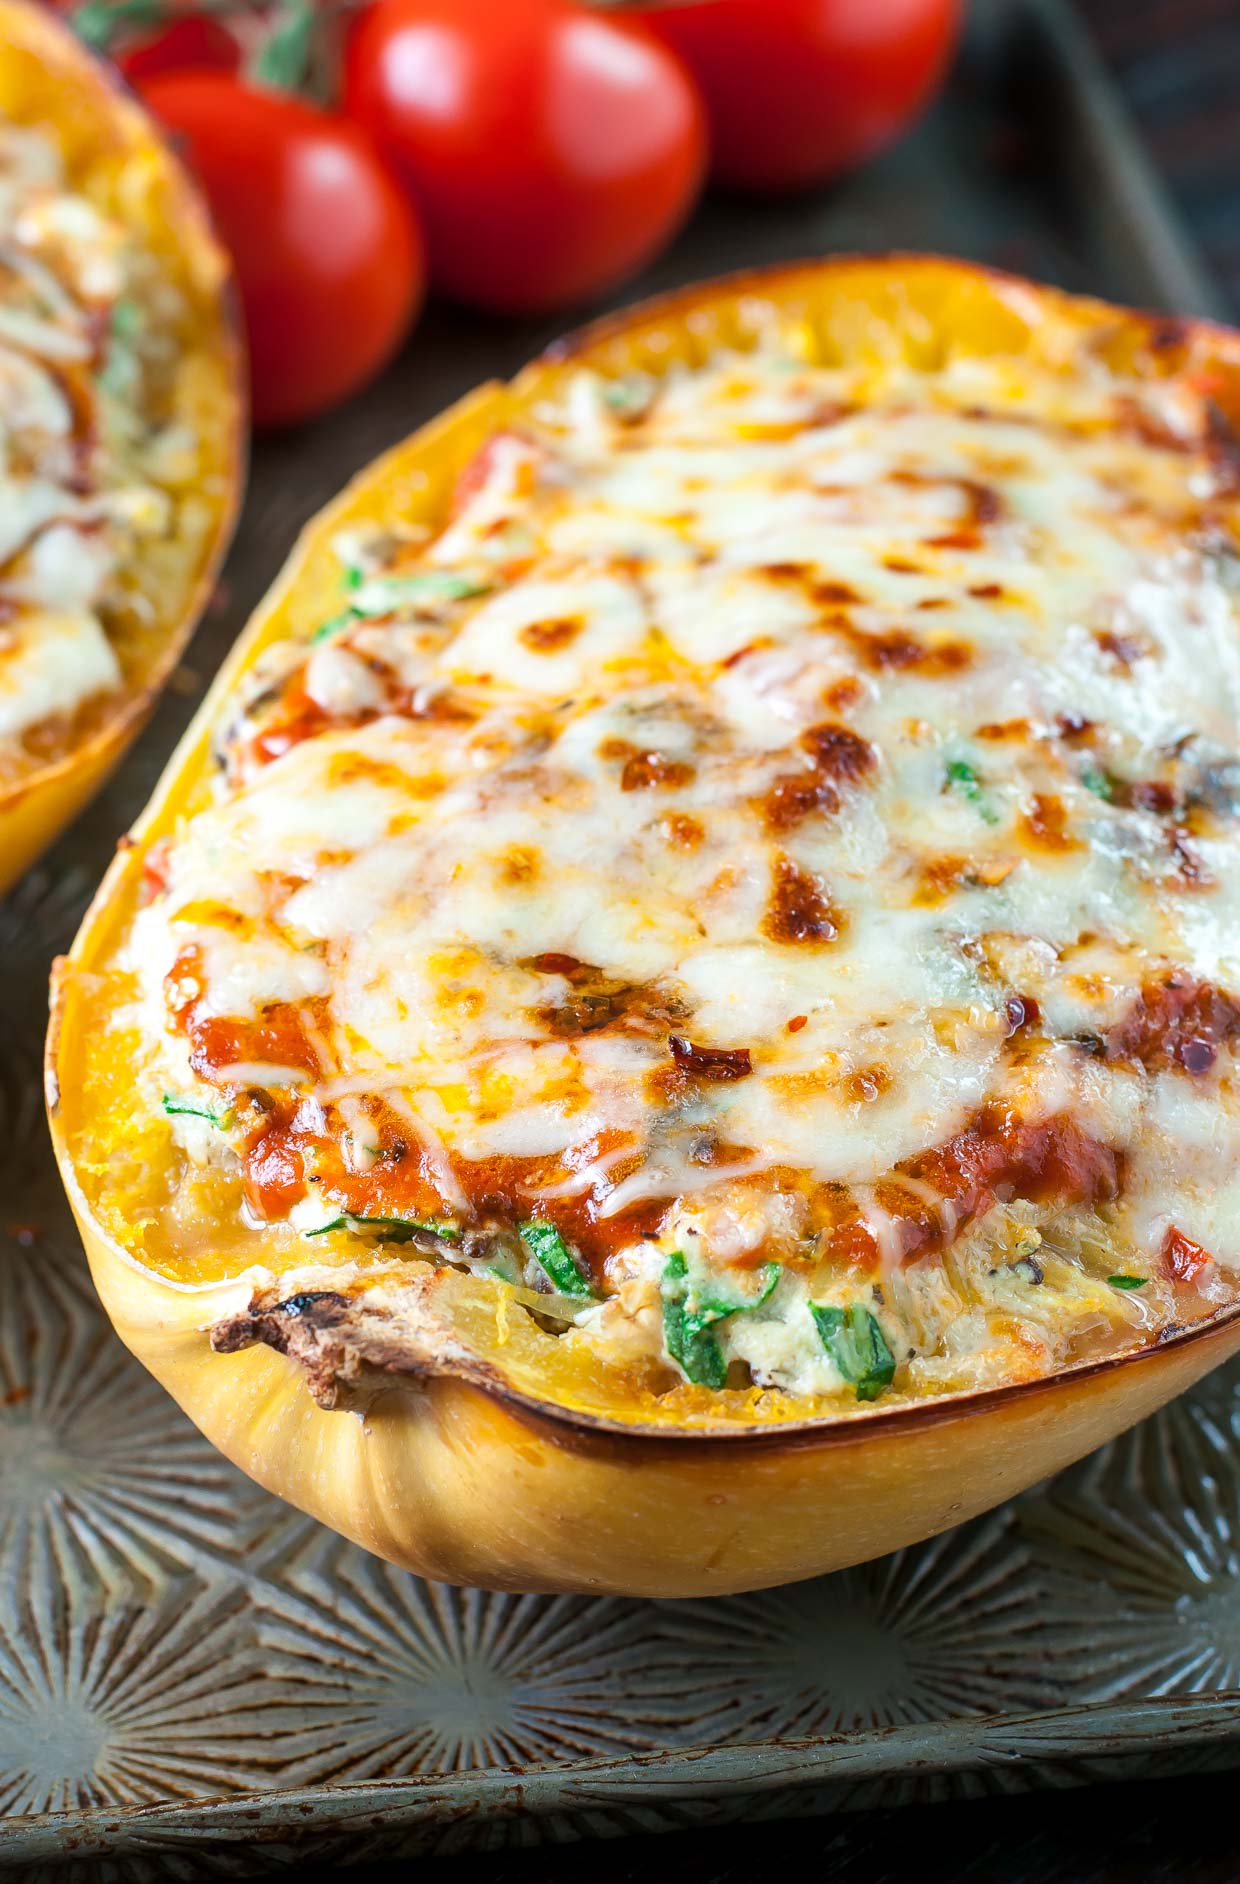 This easy Cheesy Vegetarian Spaghetti Squash Lasagna is a tasty low-carb and gluten-free alternative to traditional lasagna that is sure to satisfy all your comfort food cravings!